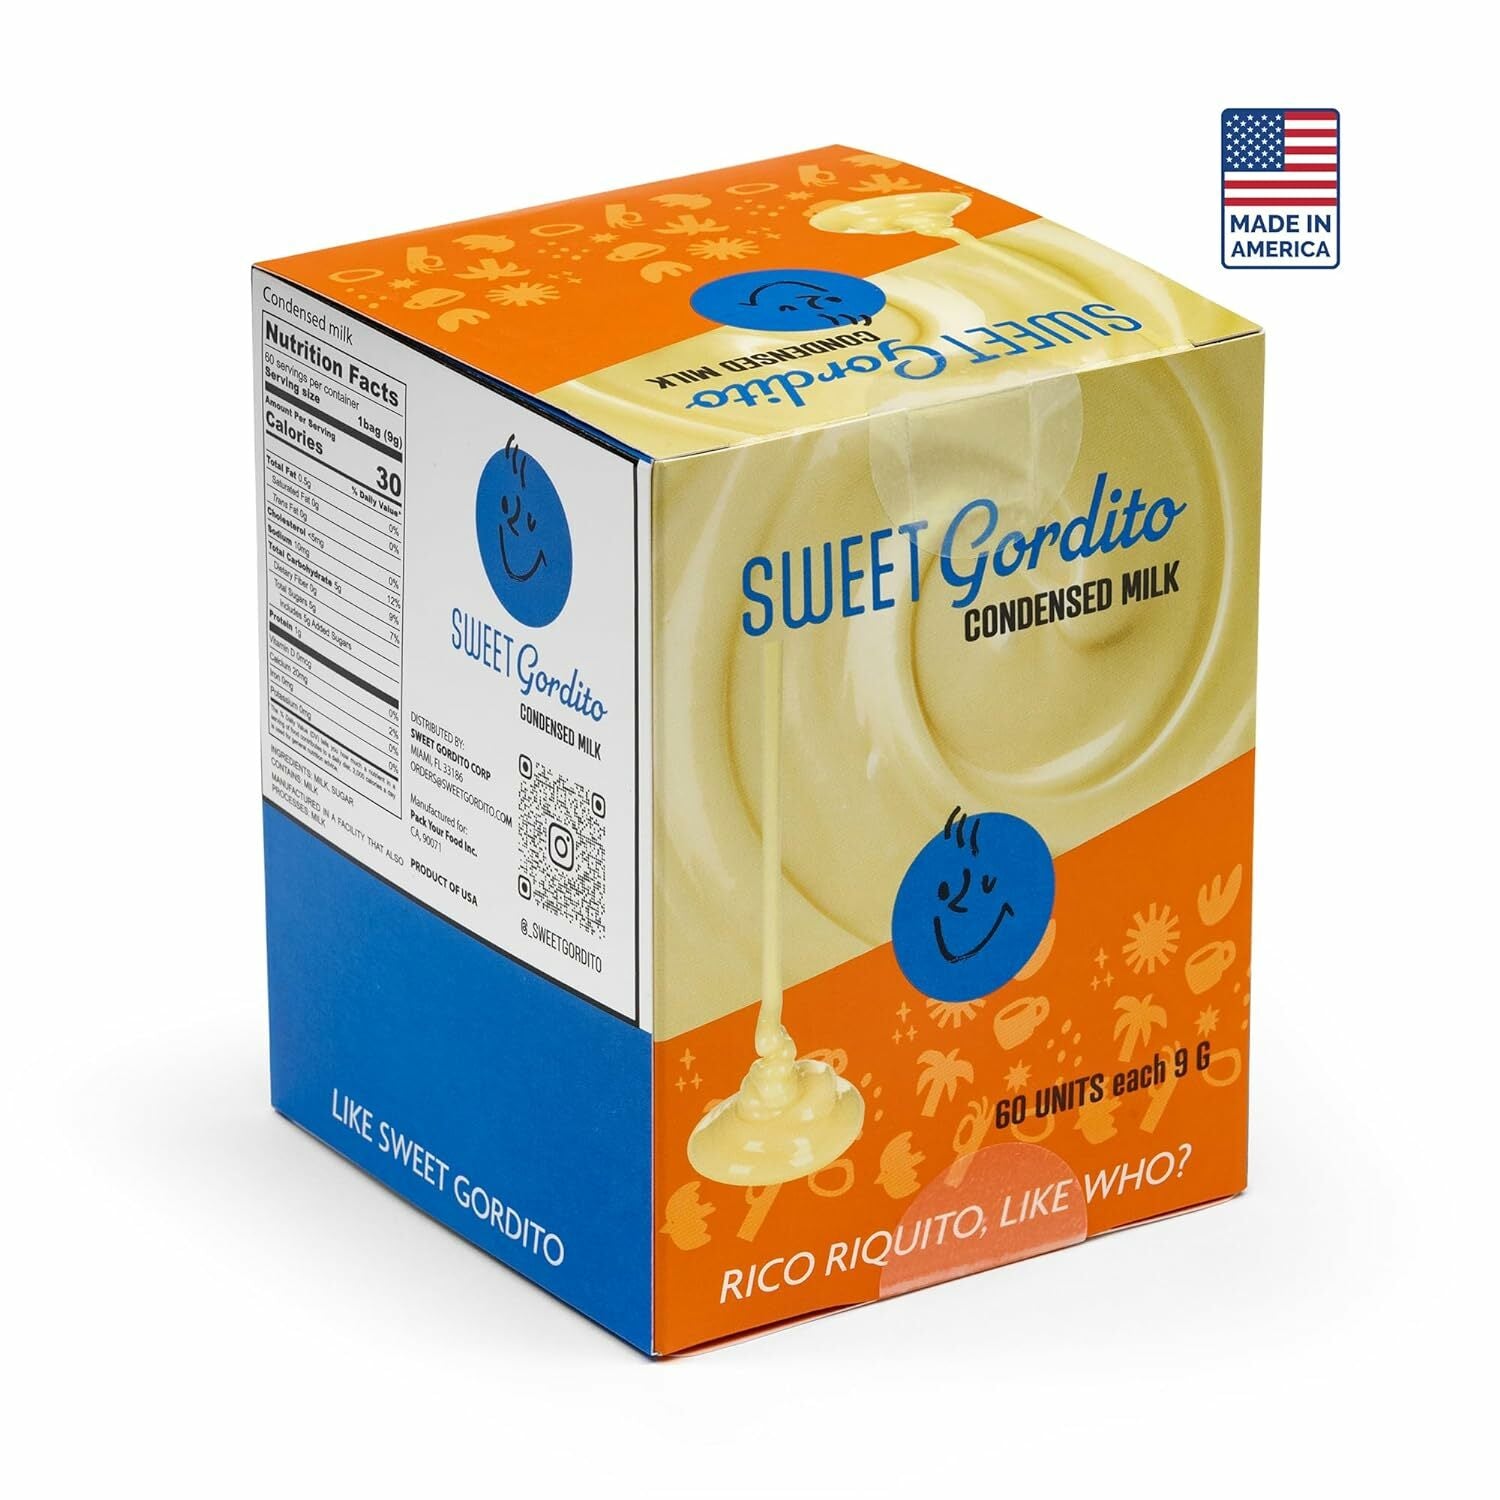 Sweet Gordito - Sweetened Condensed Milk Creamer Singles - 60 Individual Coffee Creamers, Non Refrigerated, for Coffee & Tea, Natural Sweetener Packets from US Grass-Fed Cows